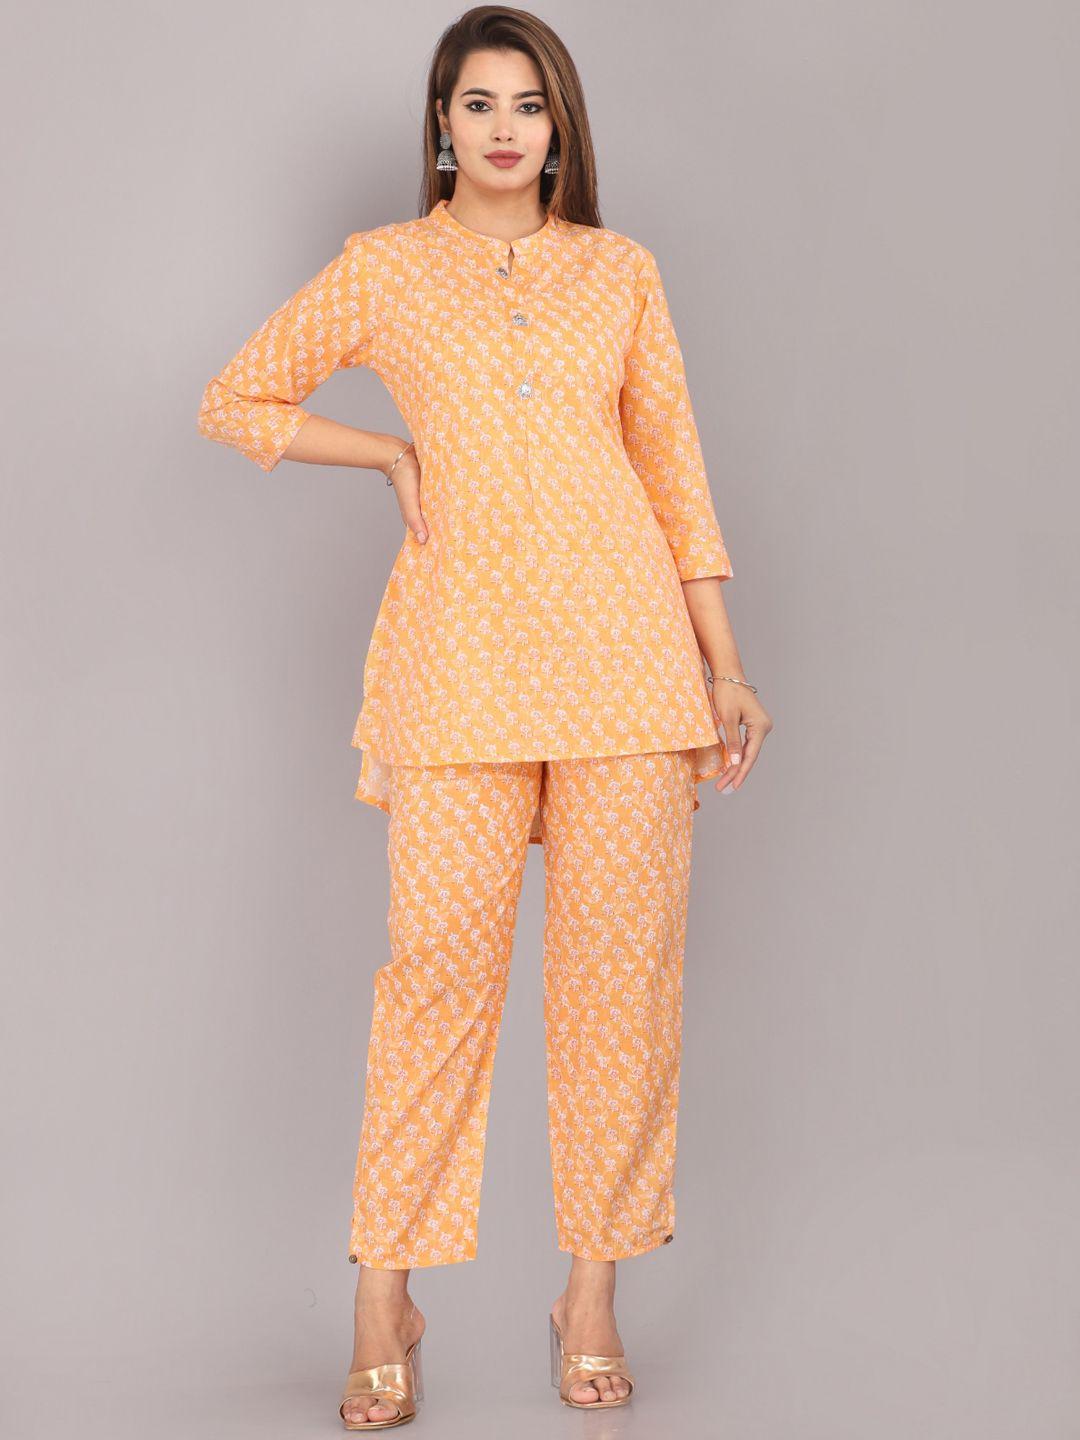 jc4u printed pure cotton top & trousers co-ords